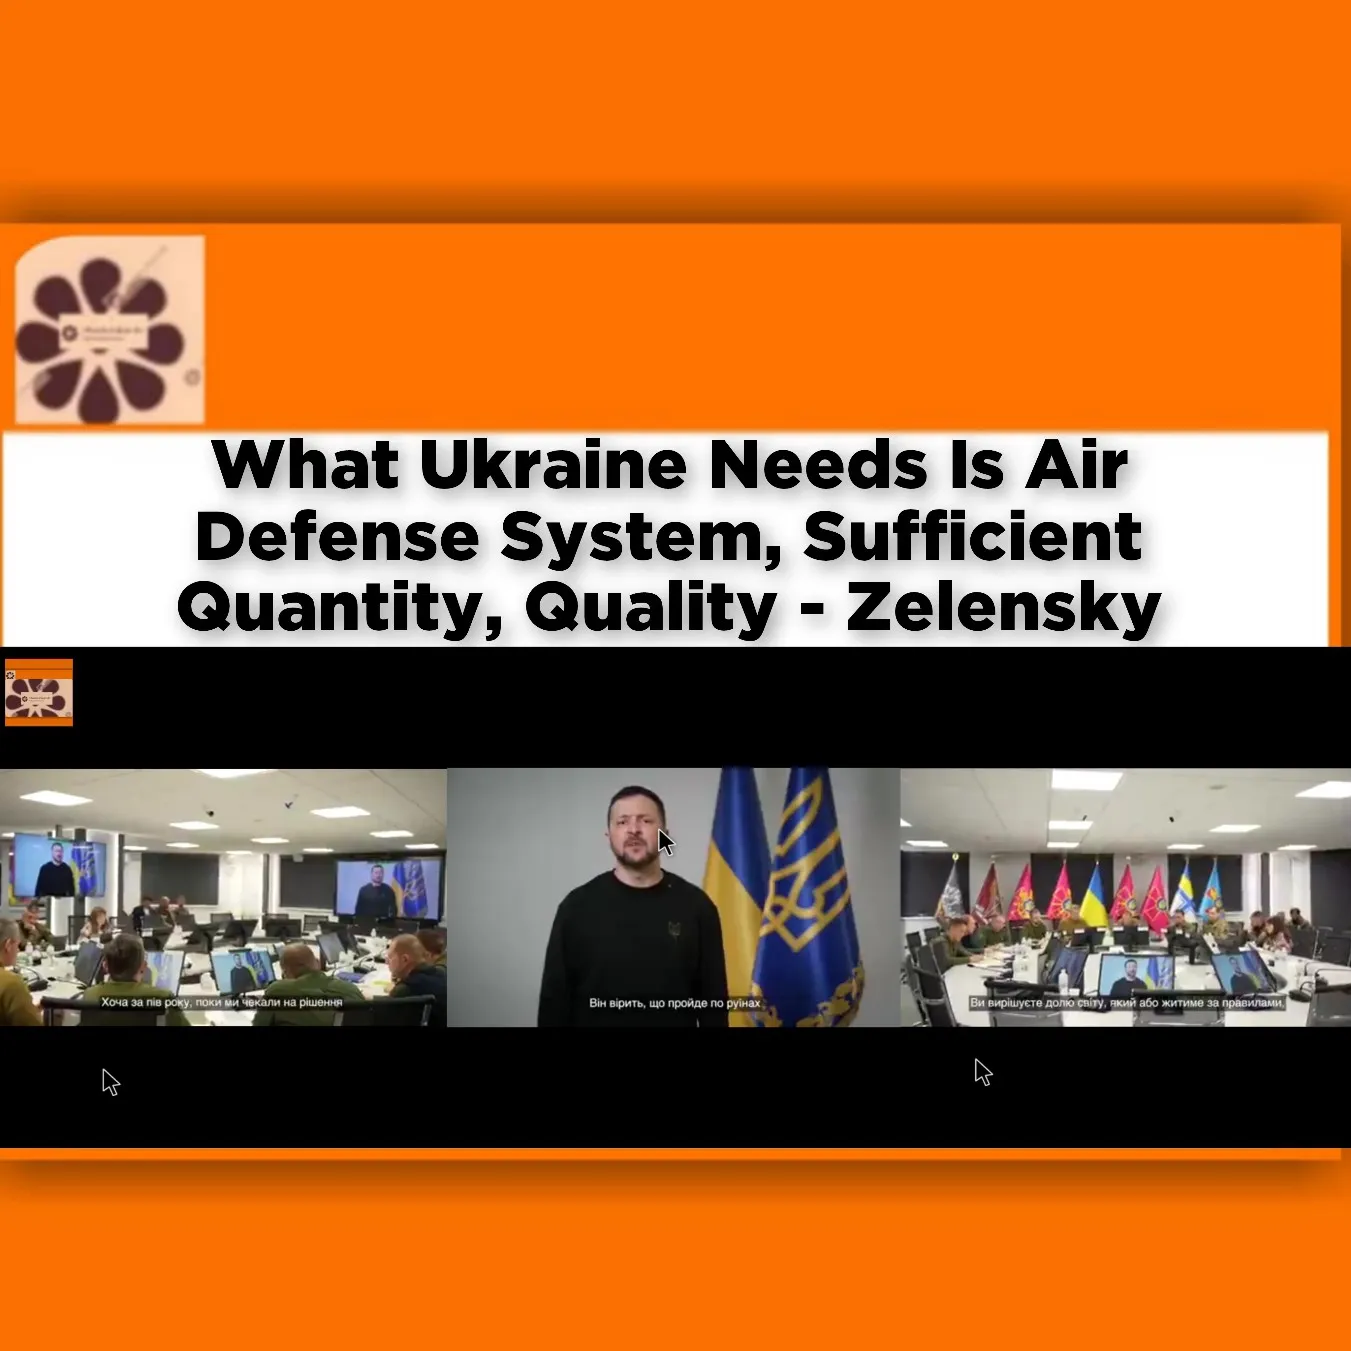 What Ukraine Needs Is Air Defense System, Sufficient Quantity, Quality - Zelensky ~ OsazuwaAkonedo #Forces